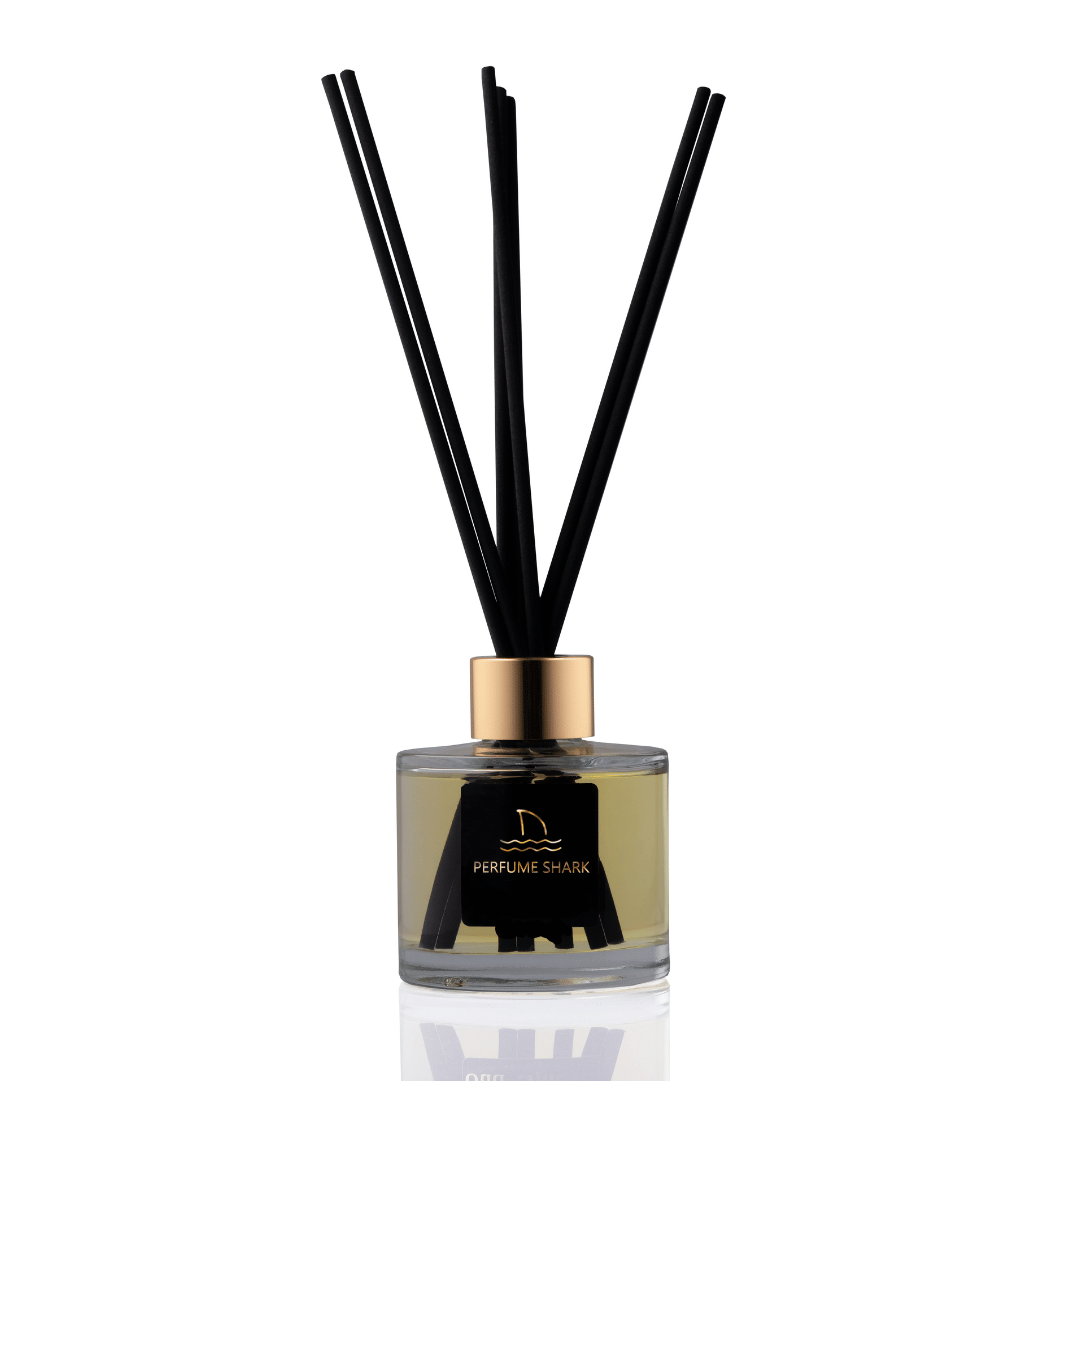 Invincible - With Similar Fragrant Notes to Gucci Bamboo